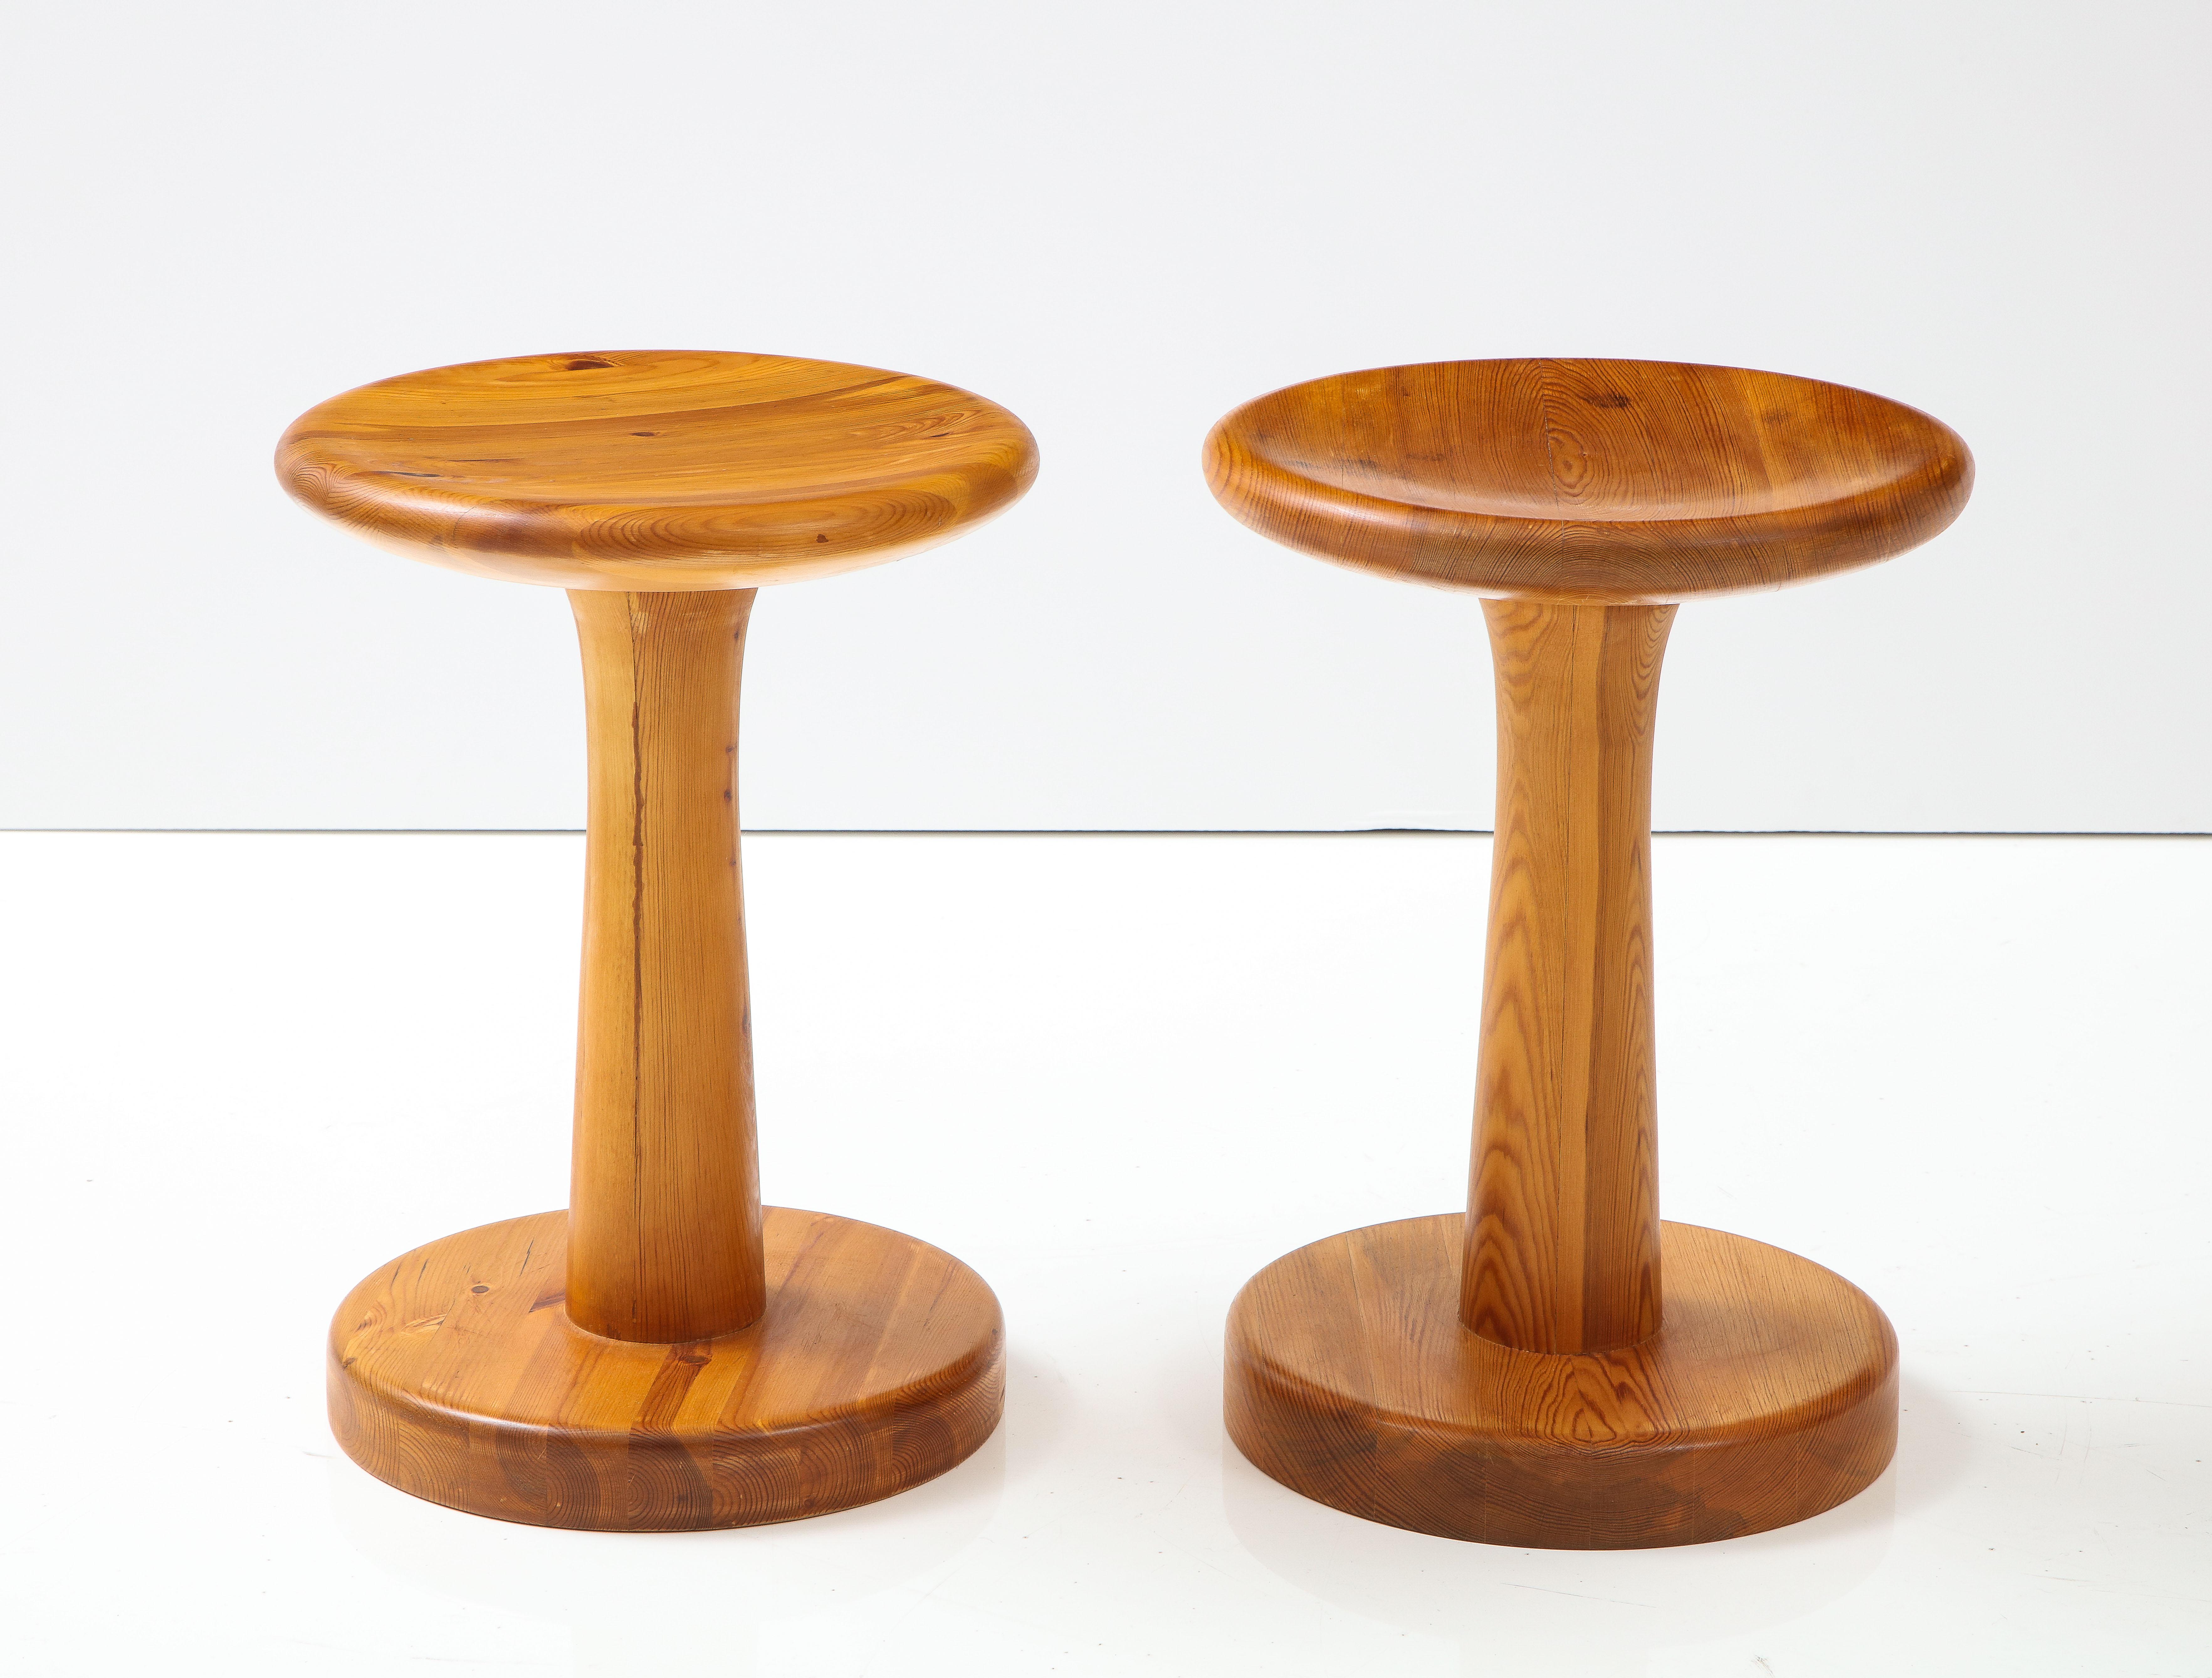 Two pine stools or side tables designed by Rainer Daumiller and produced by Hirtshals Savvæk, Denmark, Circa 1970, with thick solid circular tops raised on pedestal stem with a circular base. They are good as both stools or side tables.

